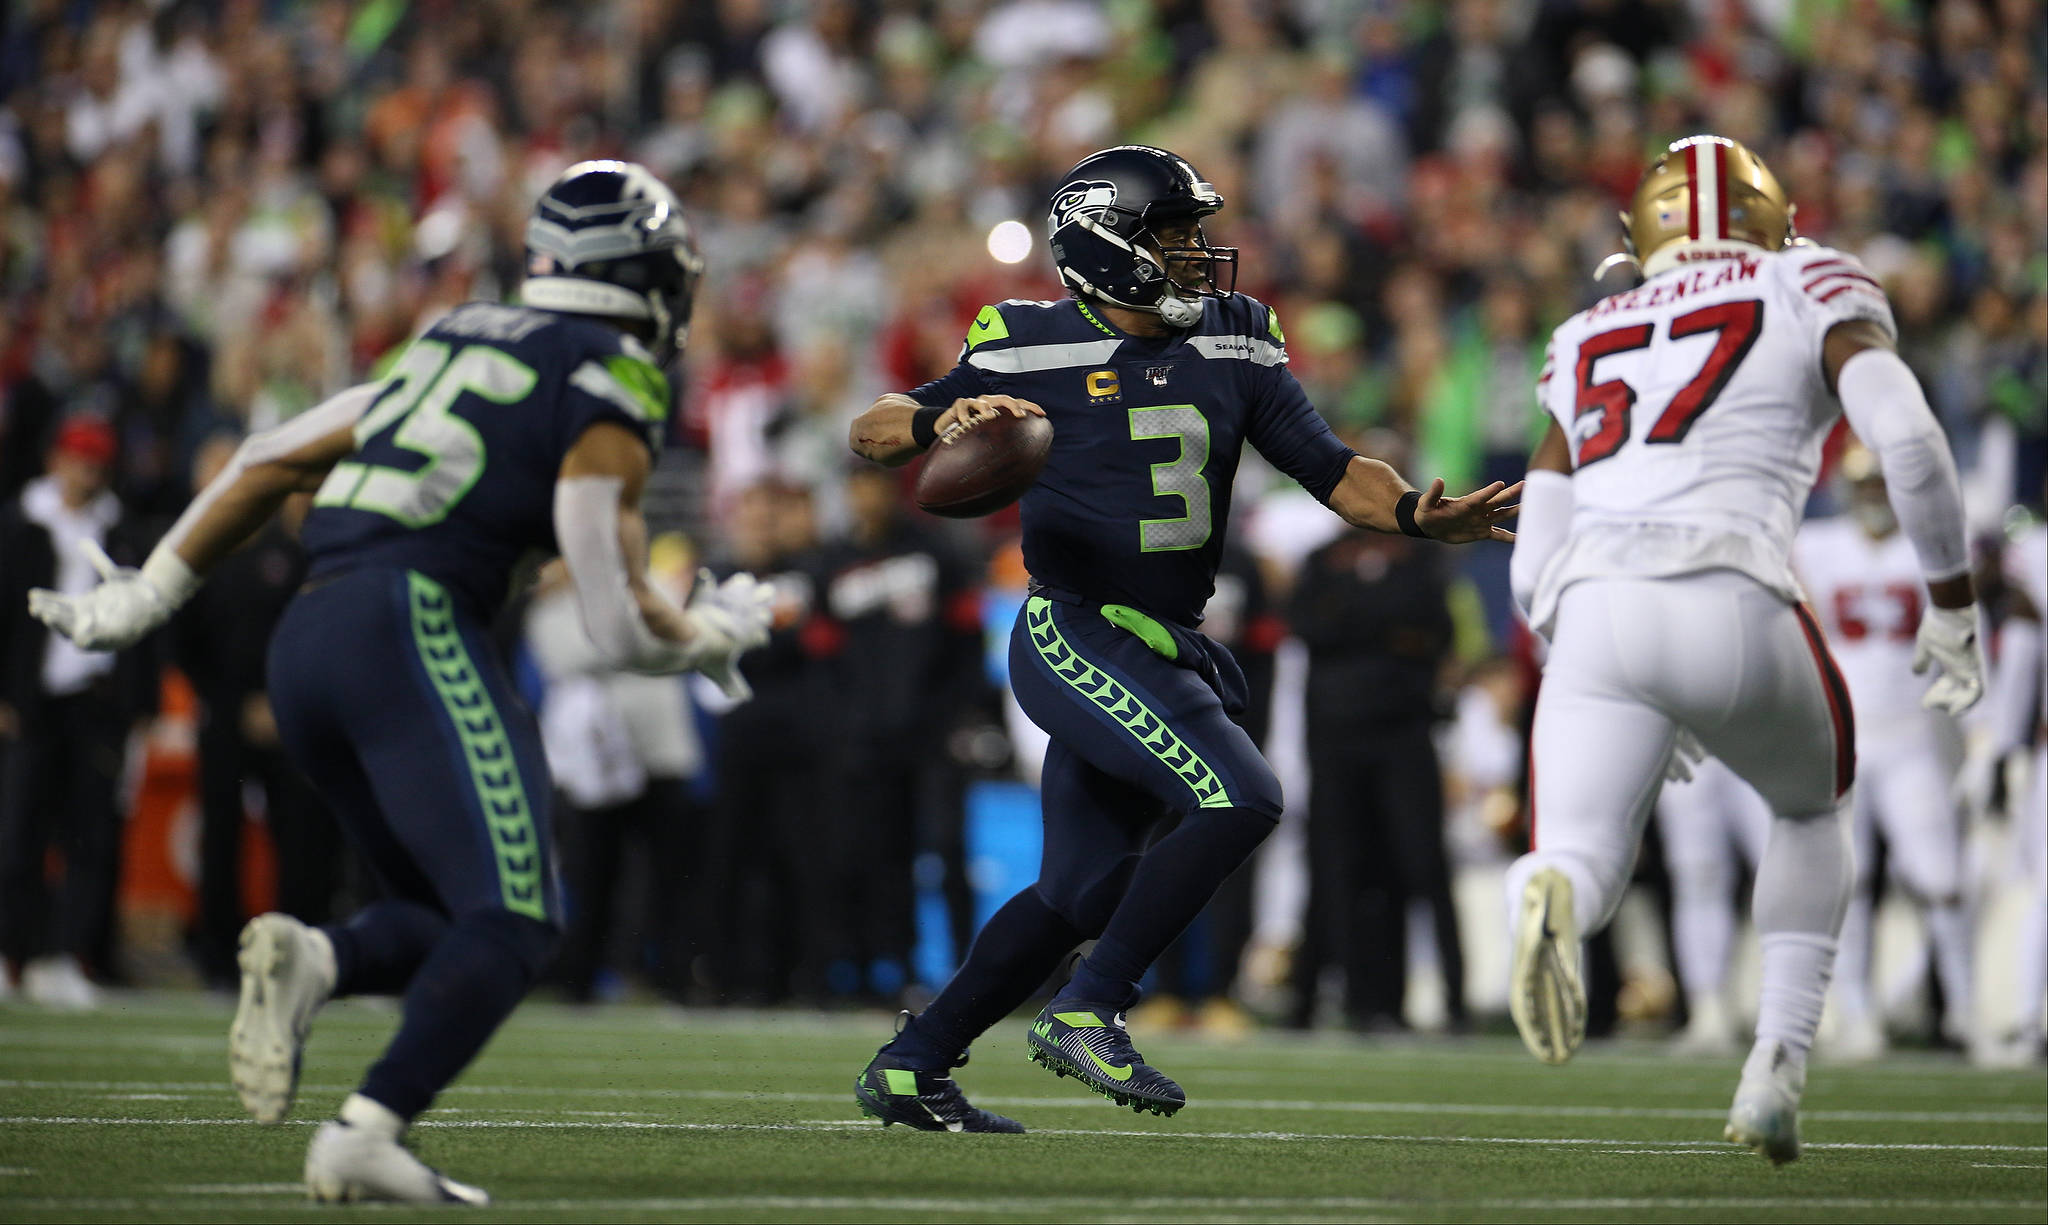 Seattle Seahawks’ Russell Wilson runs forward to throw a touchdown pass as the Seattle Seahawks lost to the San Francisco 49ers 26-21 at CenturyLink Field on Sunday, Dec. 29, 2019 in Seattle, Wash. (Andy Bronson / The Herald)